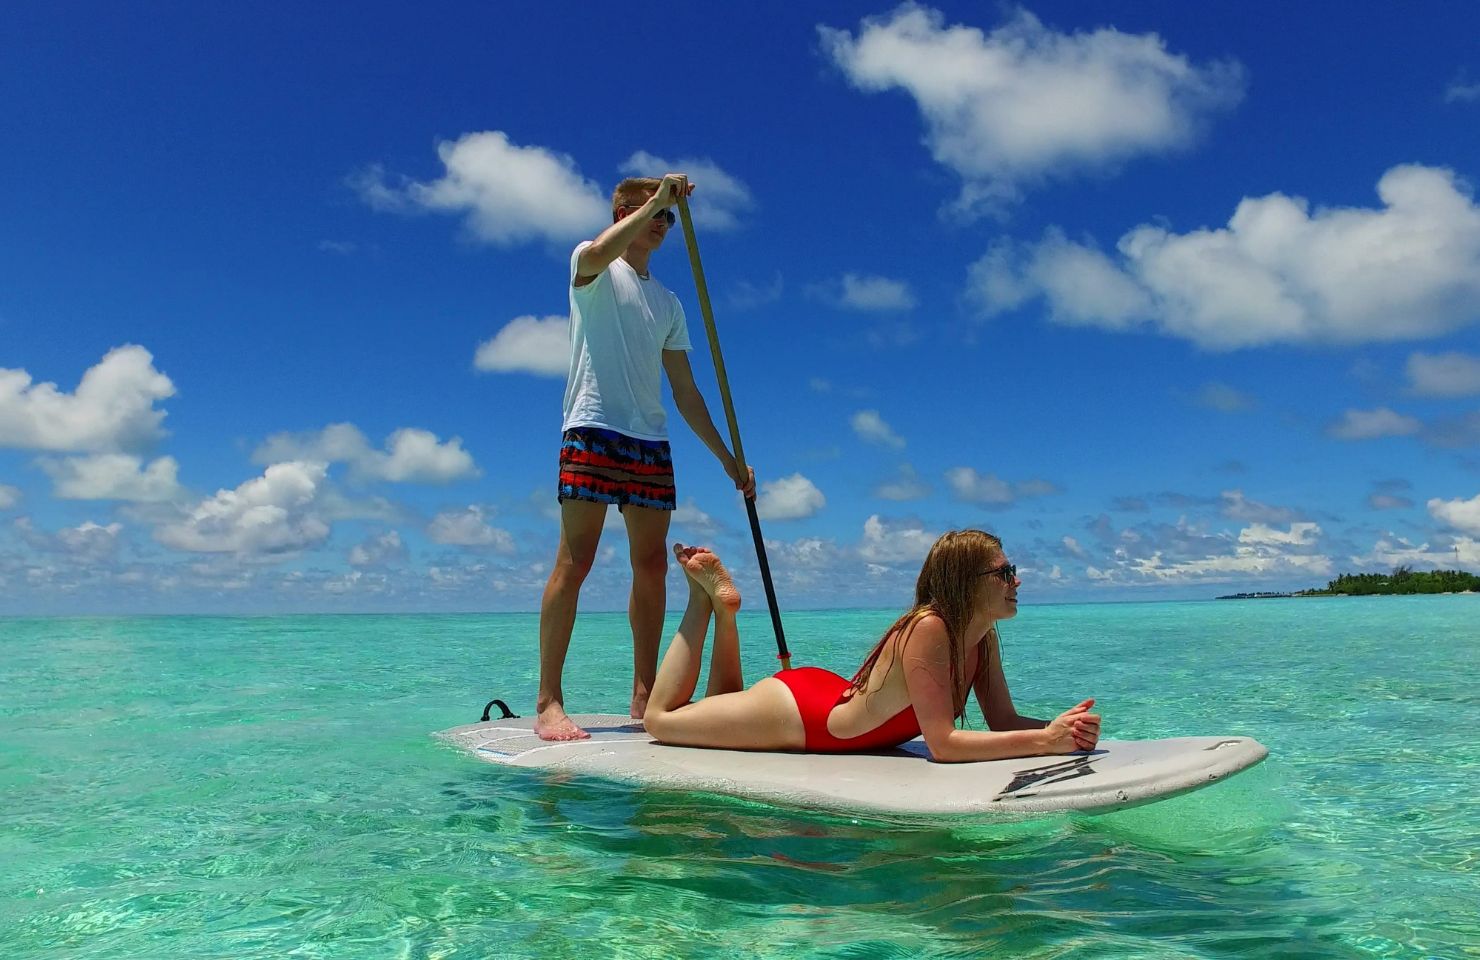 man is standing on sup board and woman is lying escape the routine